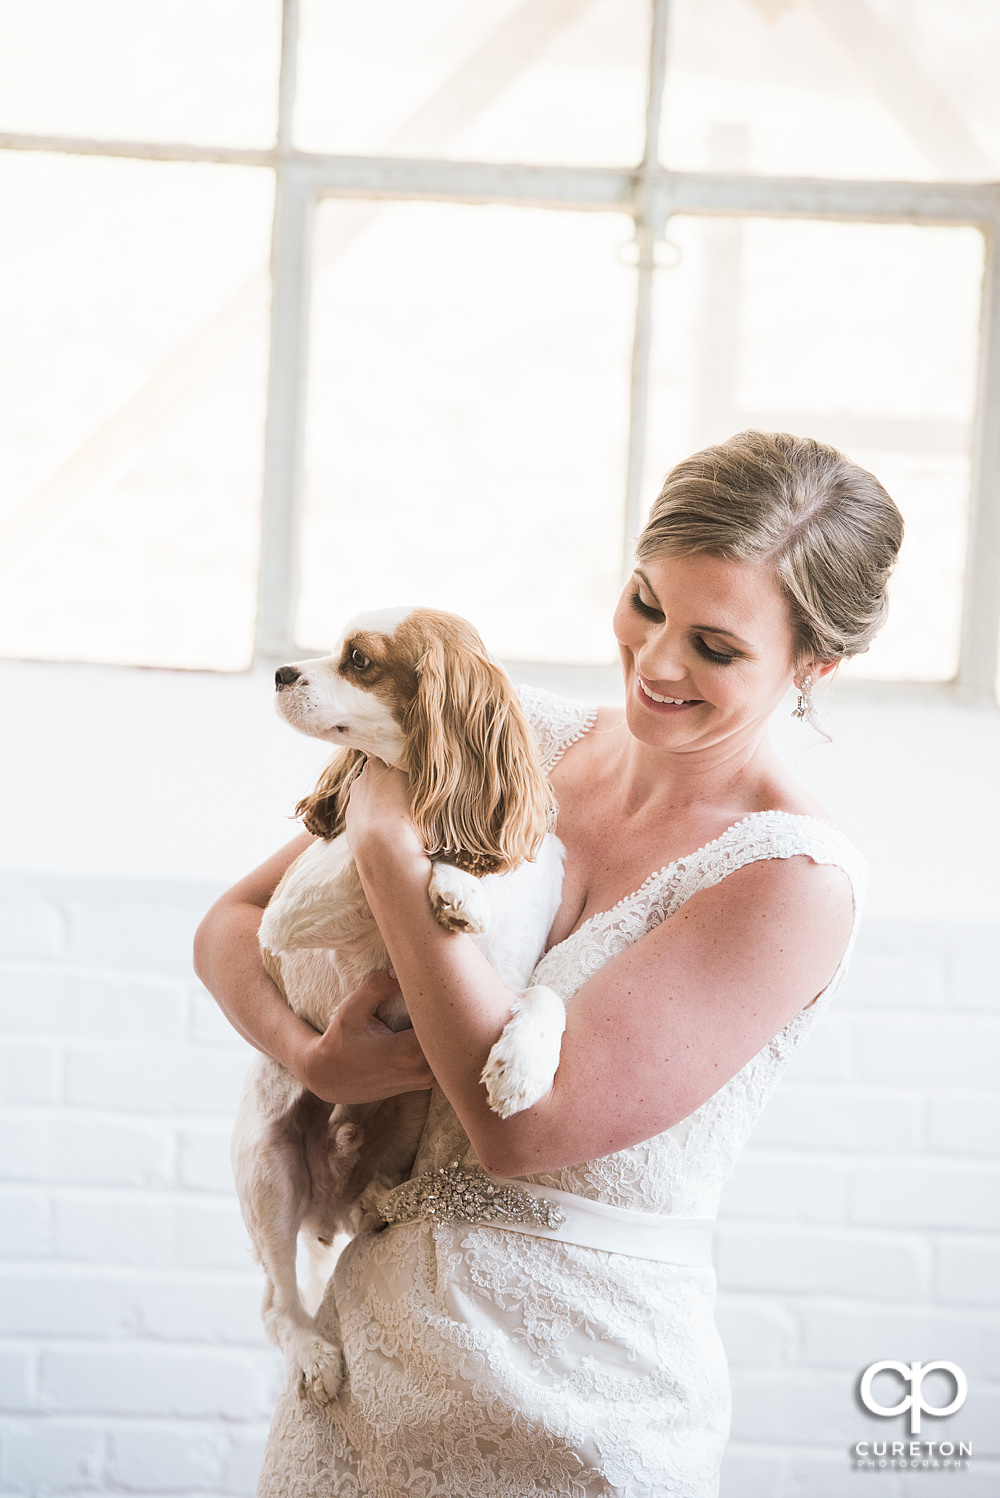 Bride and her dog laughing during her bridal session.